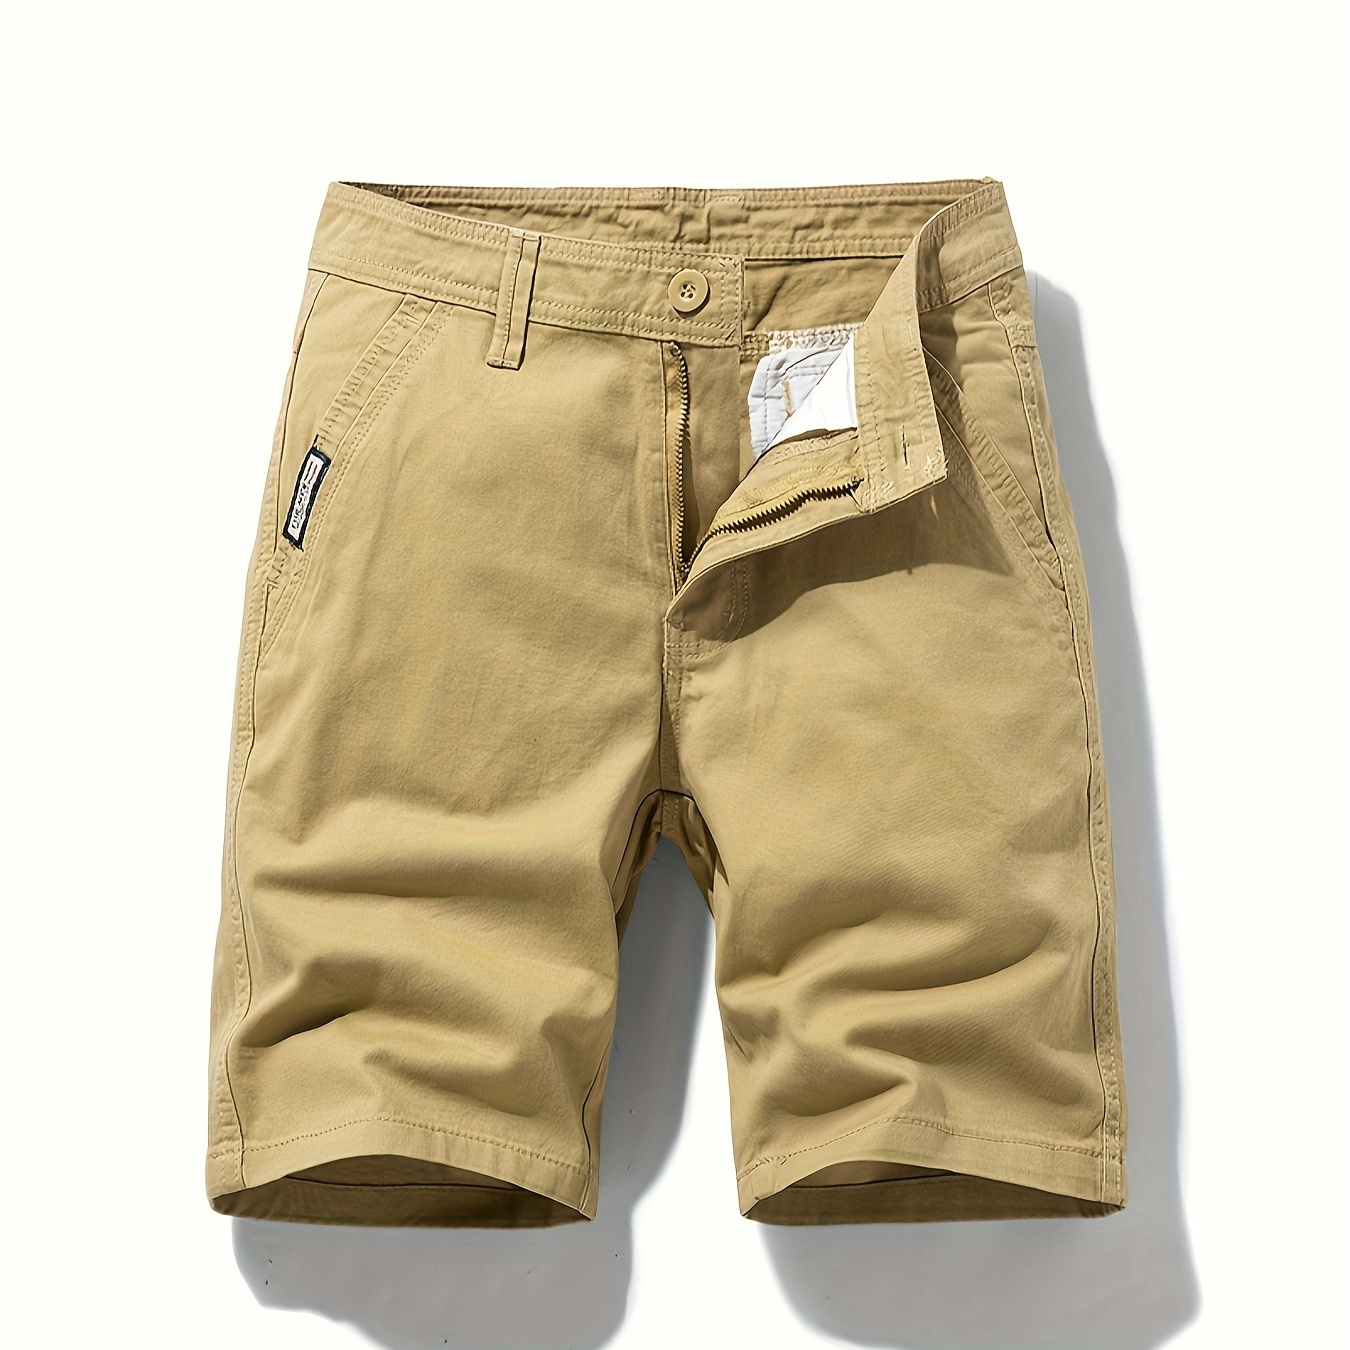 

Men's Cargo Shorts With Pockets In Solid Color, Loose Fit And Trendy For Casual Wear And Outdoor Activity